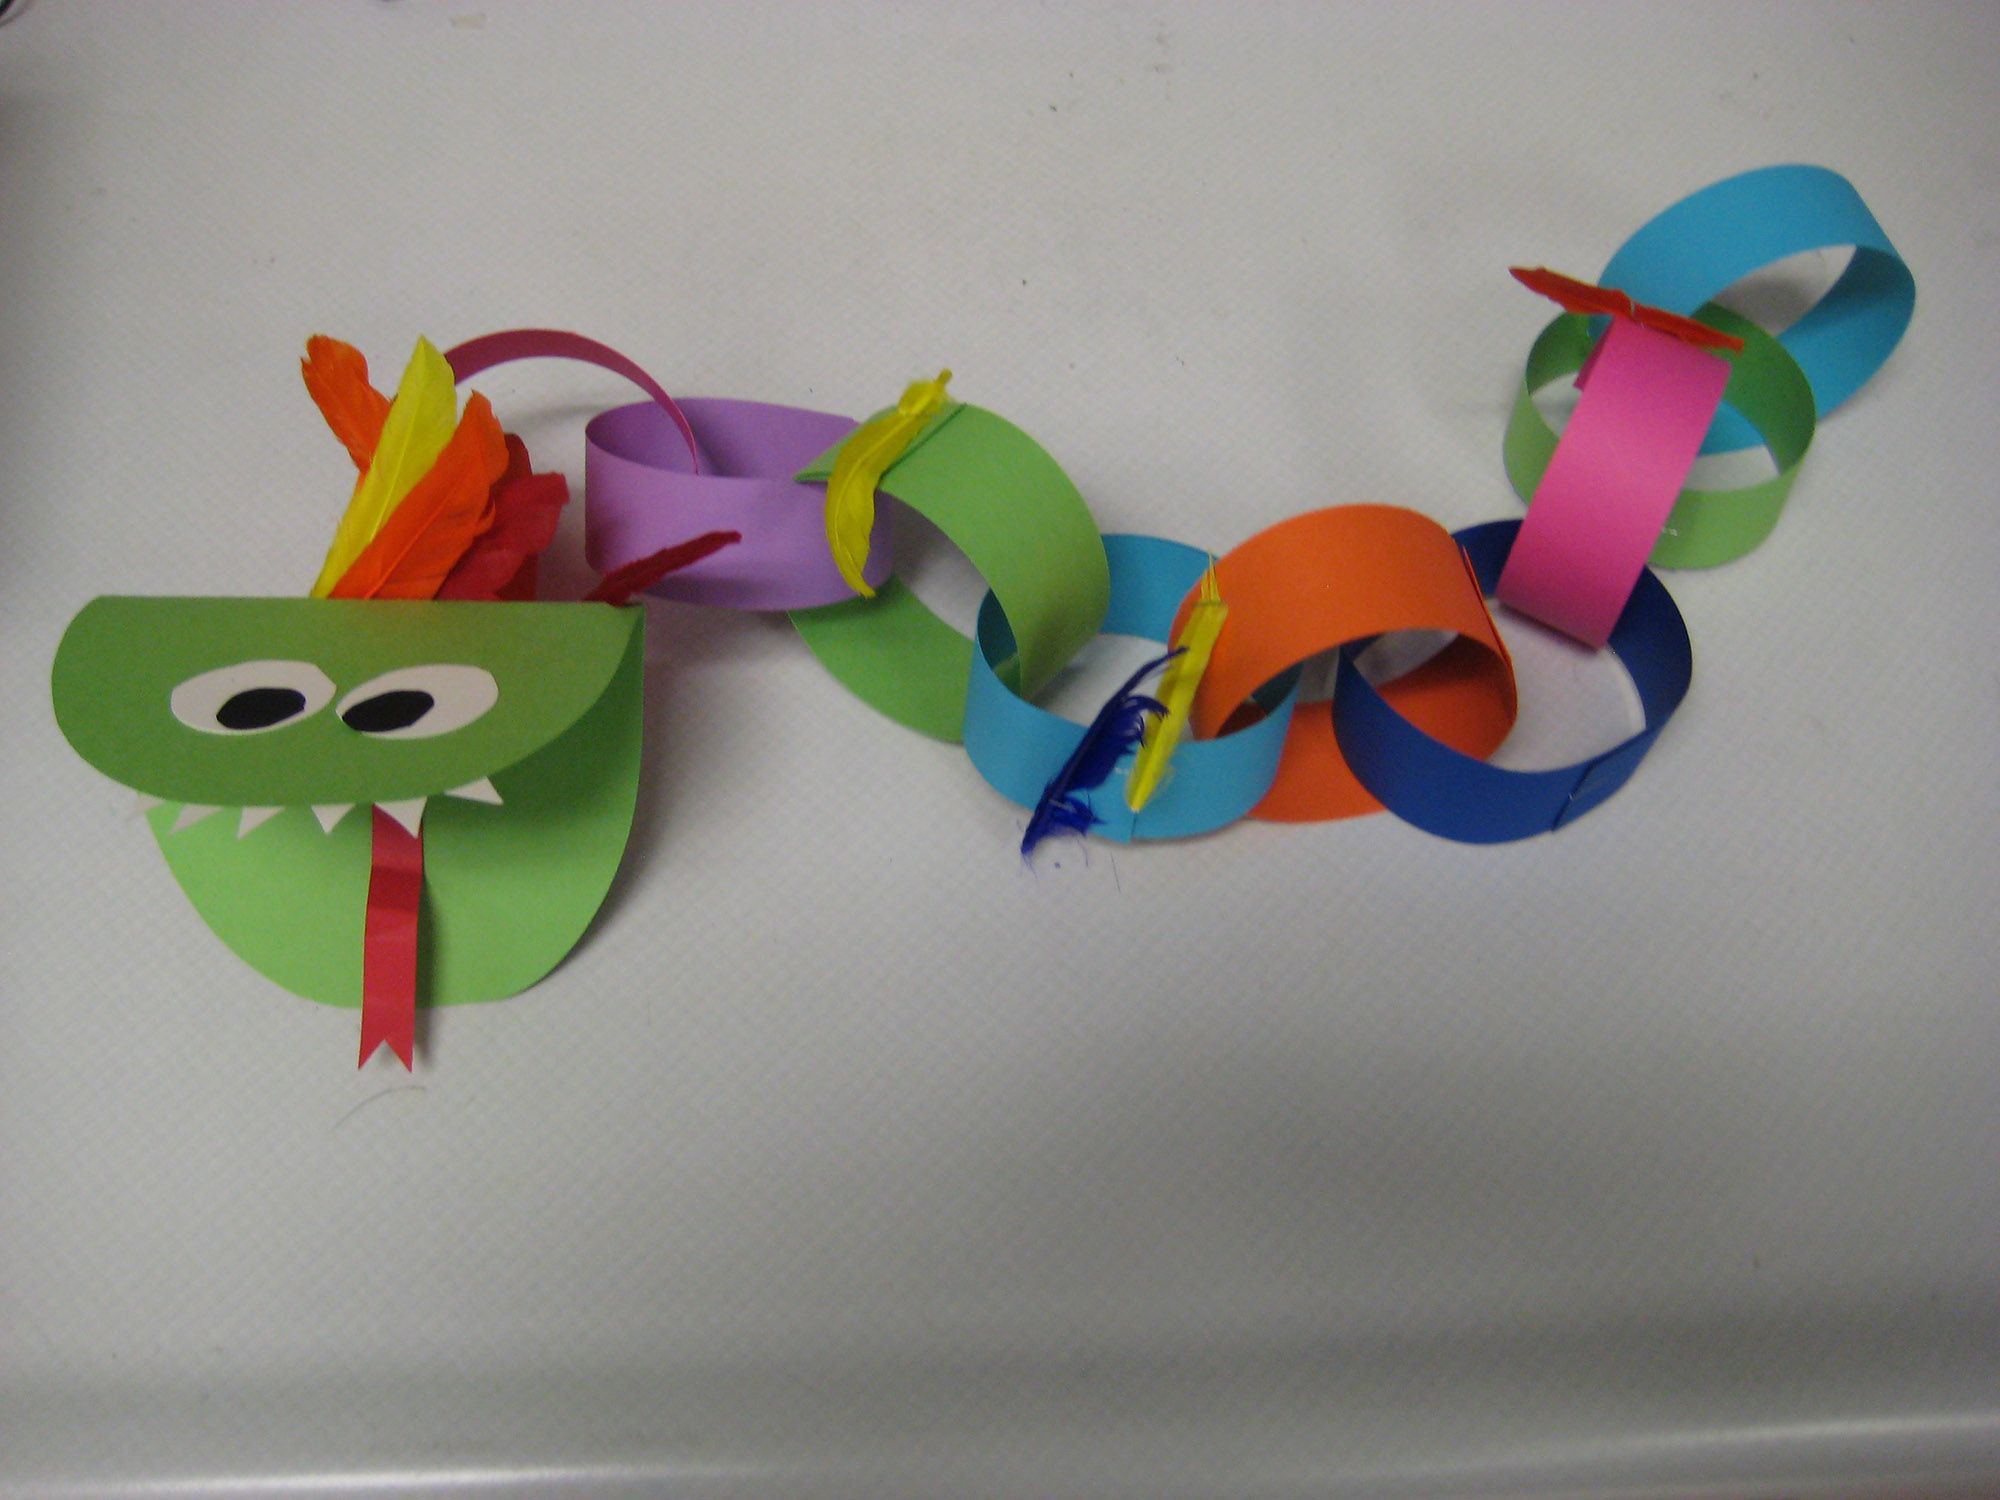 Dragon Craft For Kids
 Celebrate Chinese New Year with this cute colorful craft